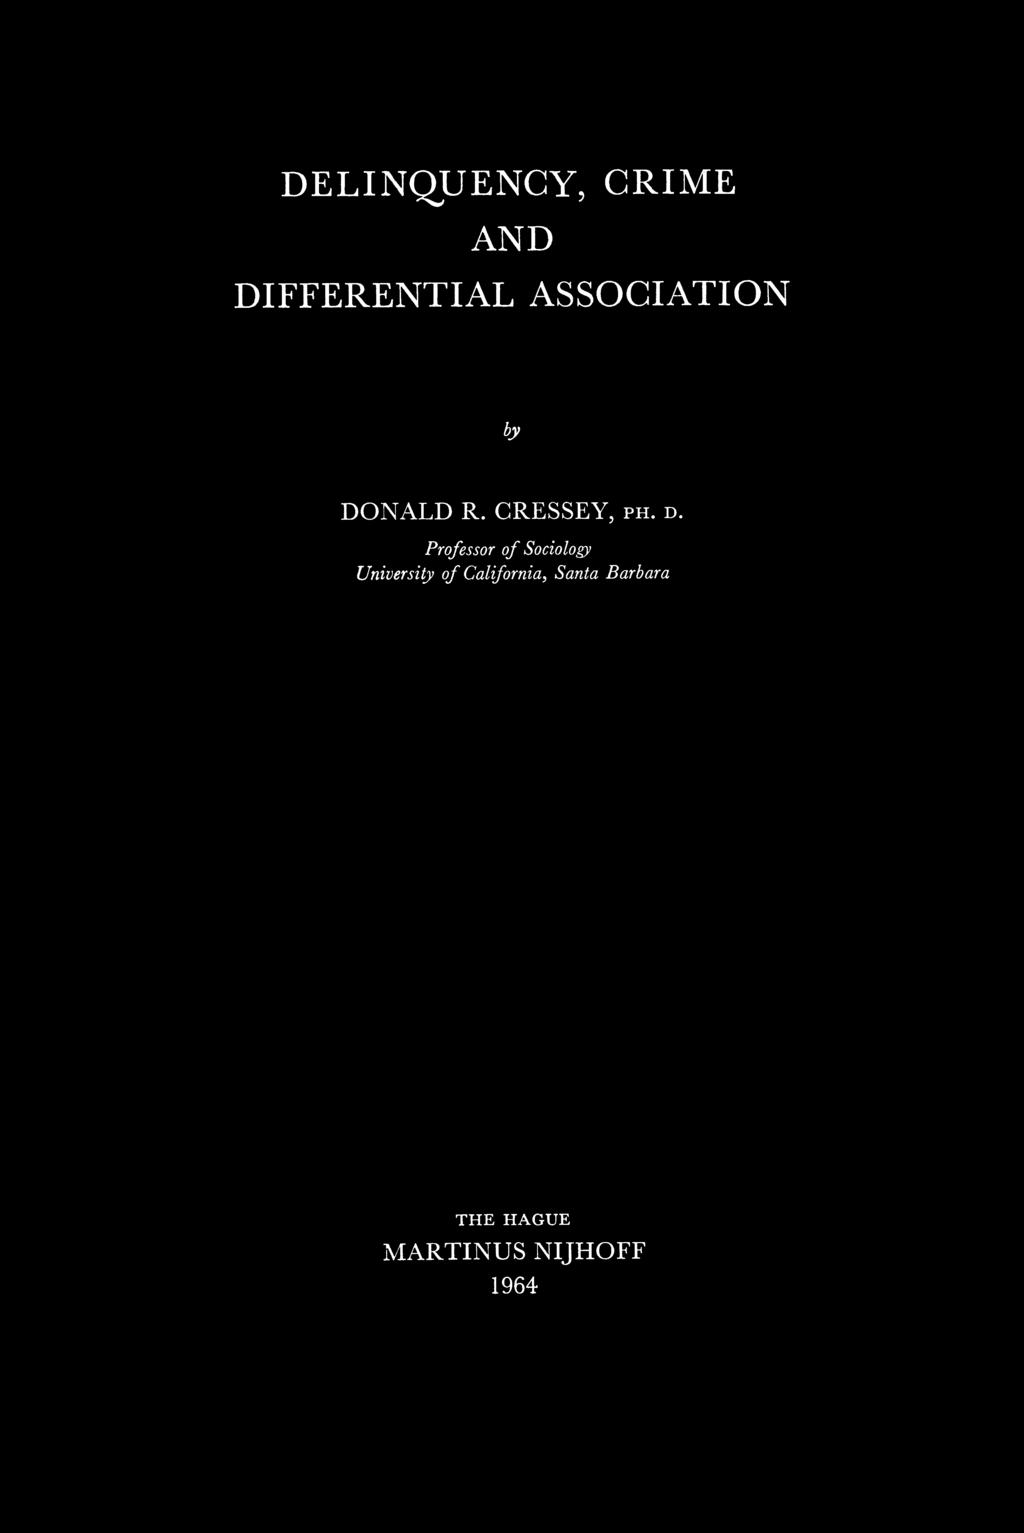 DELINQUENCY, CRIME AND DIFFERENTIAL